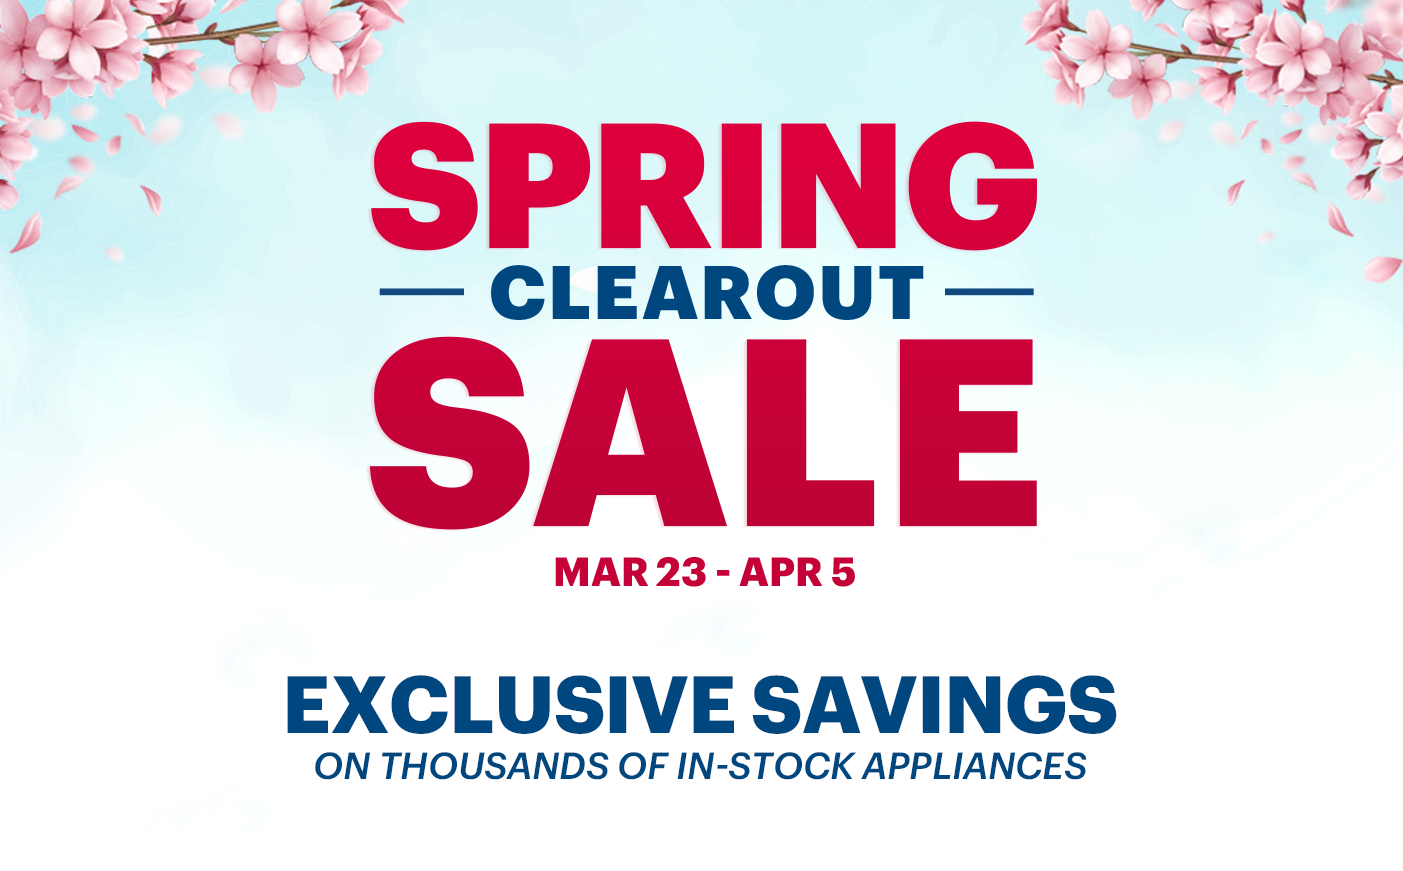 Spring Clearout Sale Mar 23-Apr 5, 2023